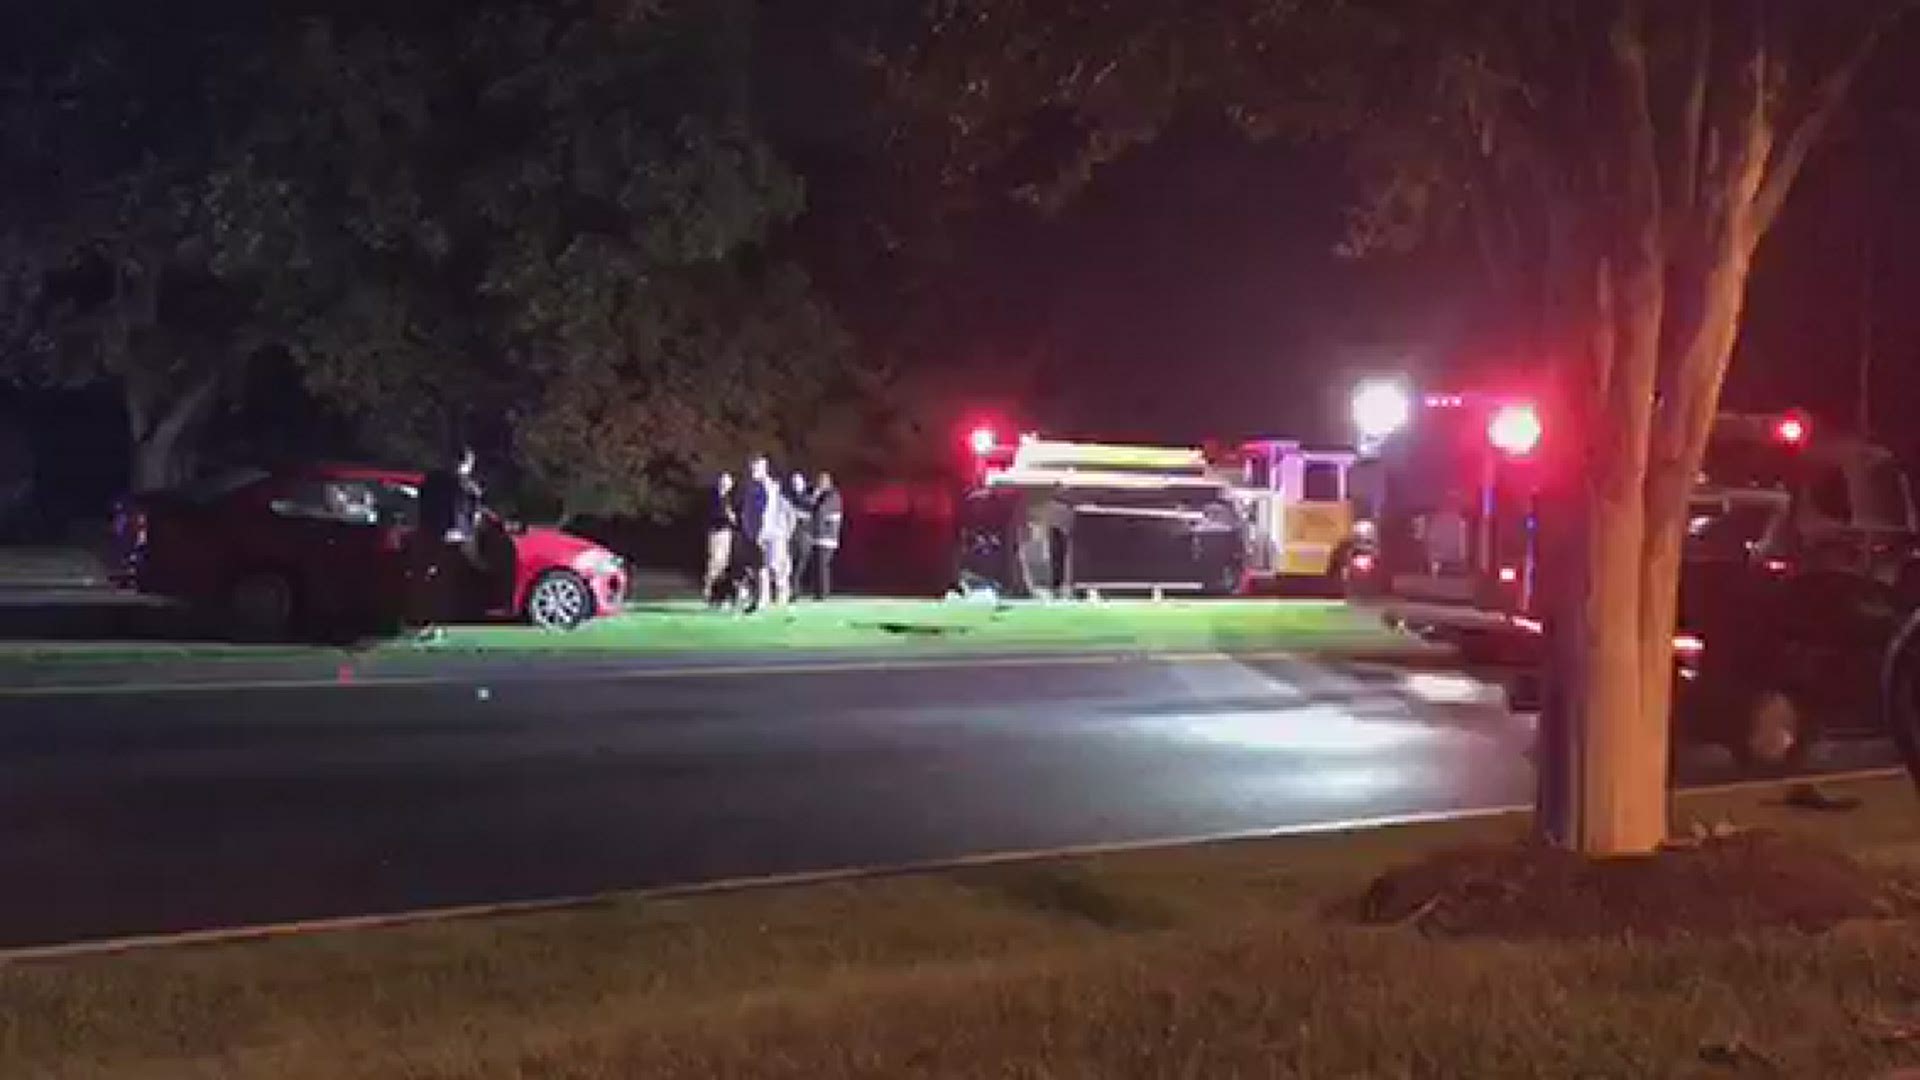 Officials said that they were working to help people trapped after a crash on Middlebrook Pike Aug. 29.